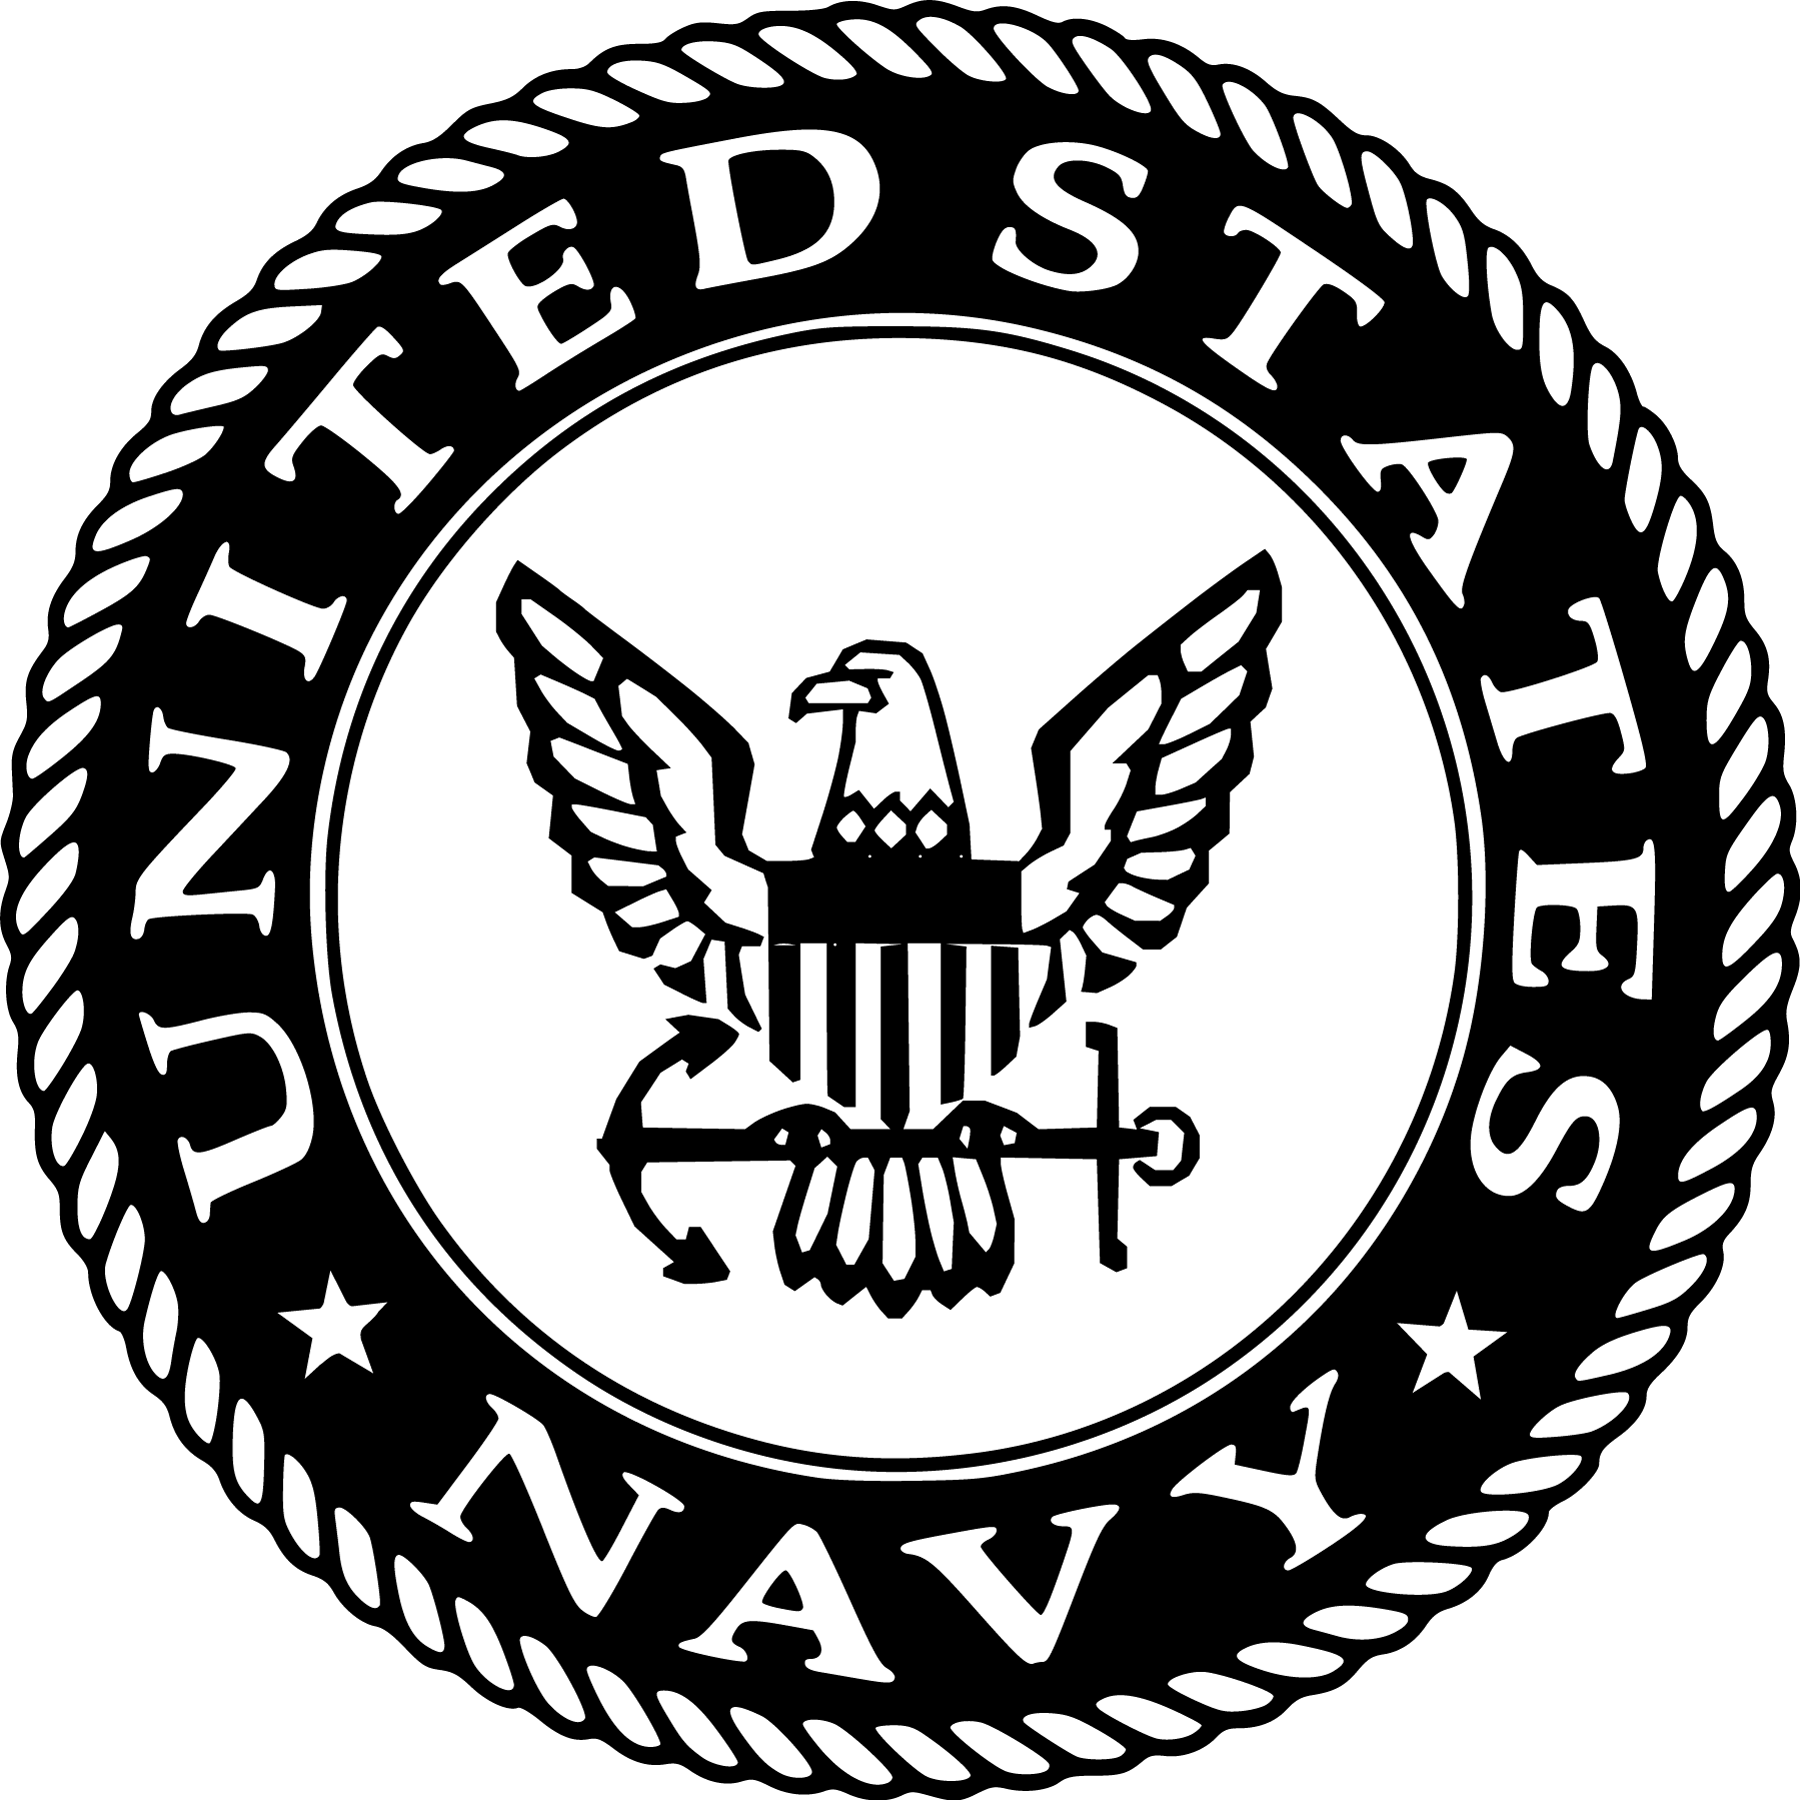 Download Military Logos Vector - Army, Navy, Air Force, Marines ...